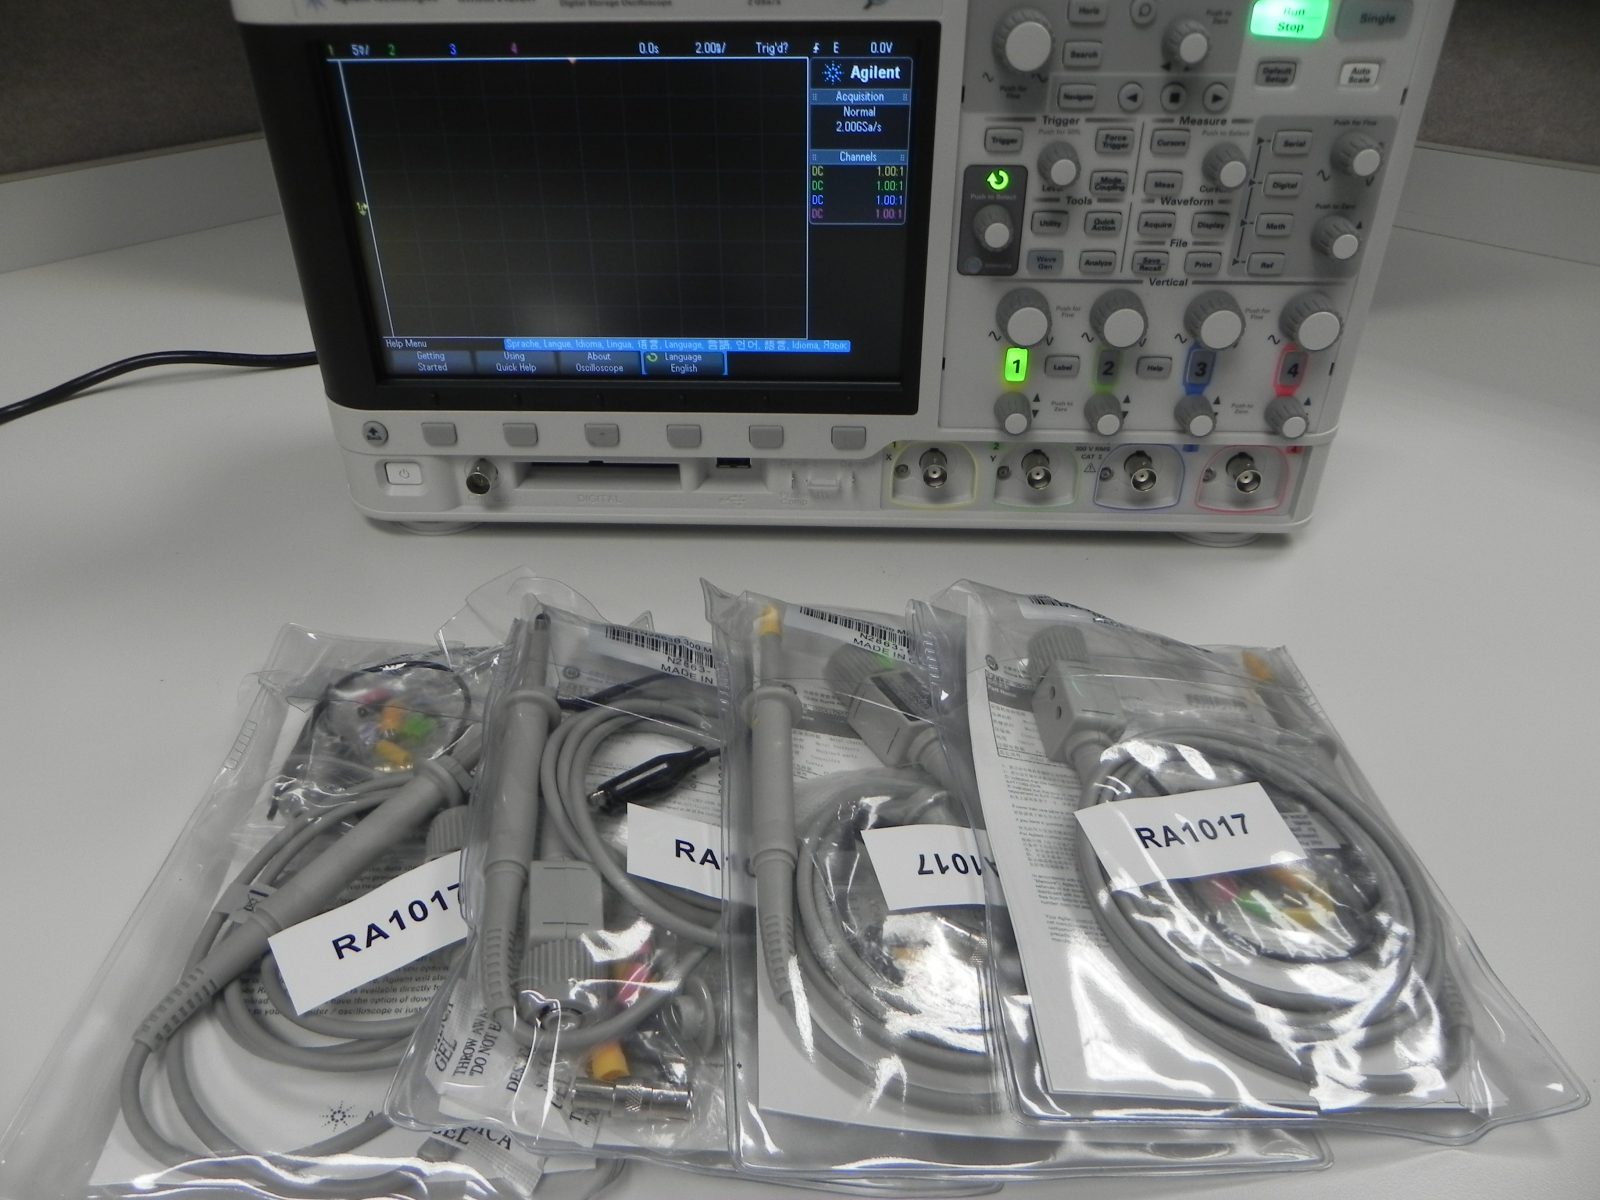 HP/Agilent DSOX2024A 200 MHz, 4 Channel Oscilloscope